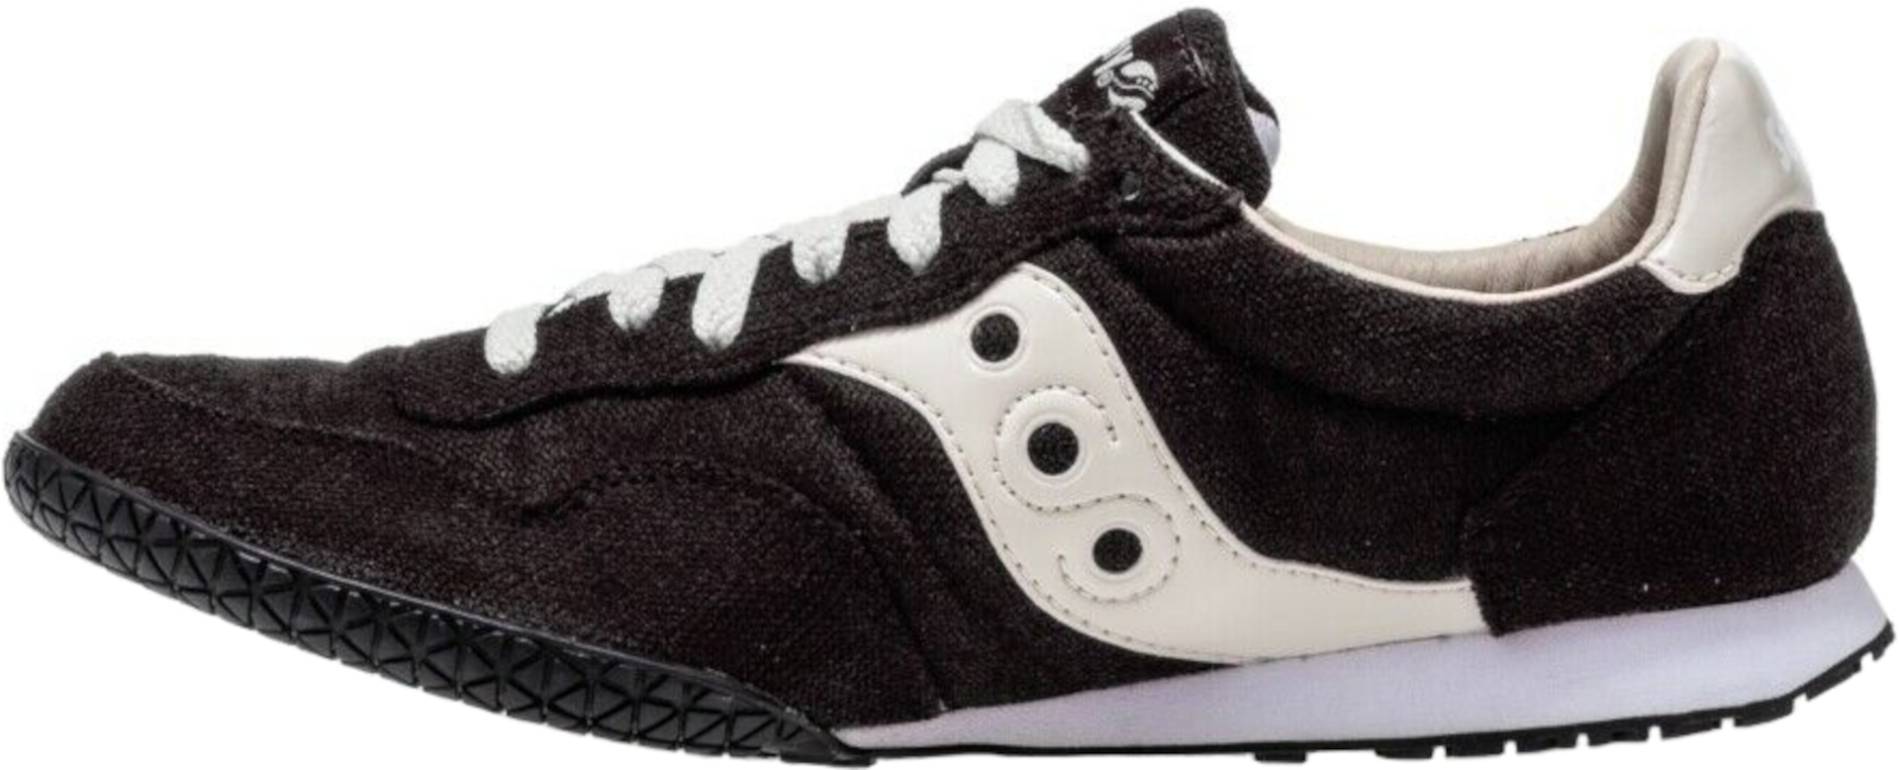 where to buy saucony bullet shoes